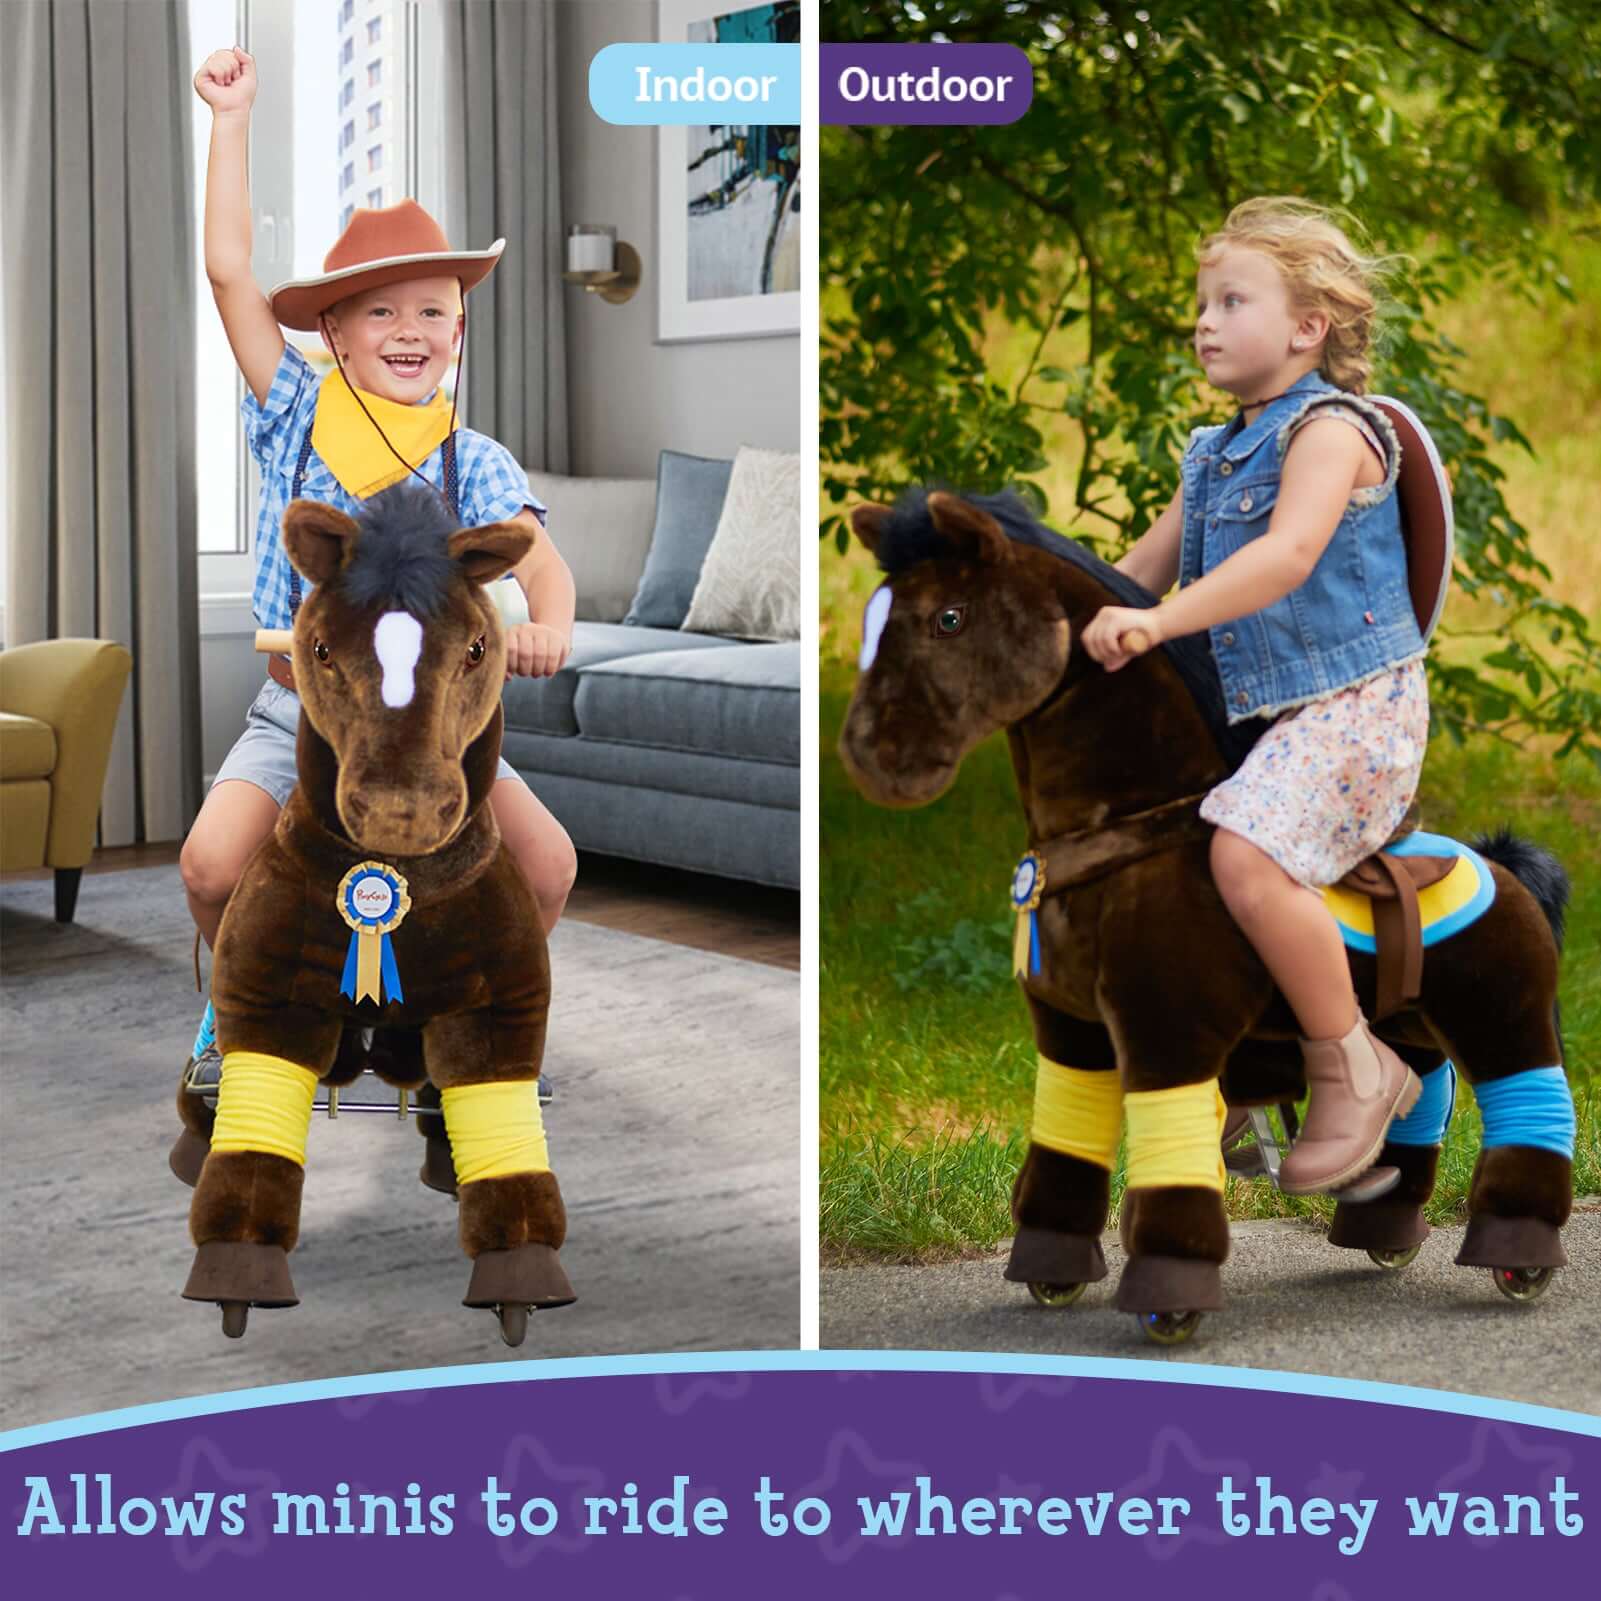 Model K Chocolate Ride On Horse For Age 4-8 (accessories Included)